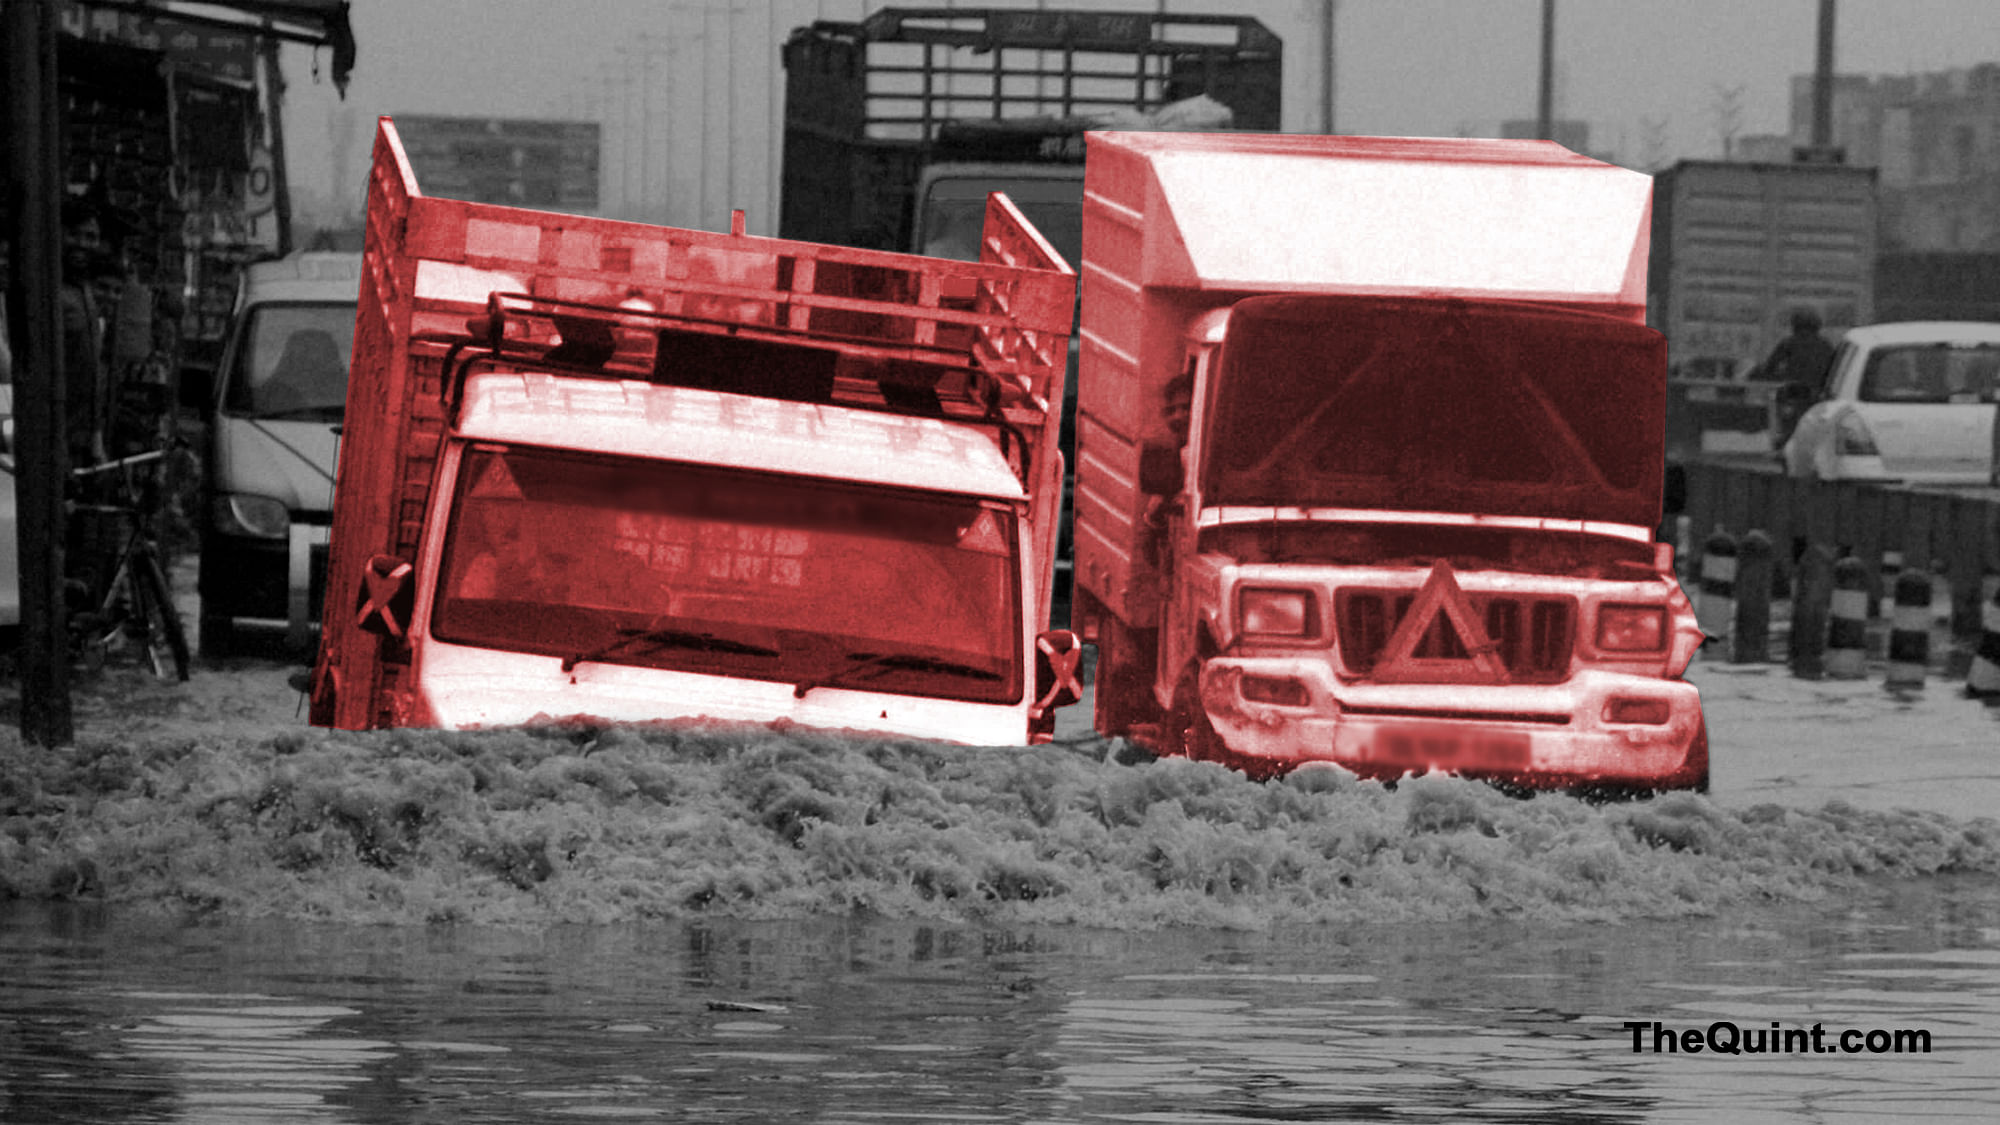 Flooding has traffic at a standstill. (Image altered by <b>The Quint</b>)